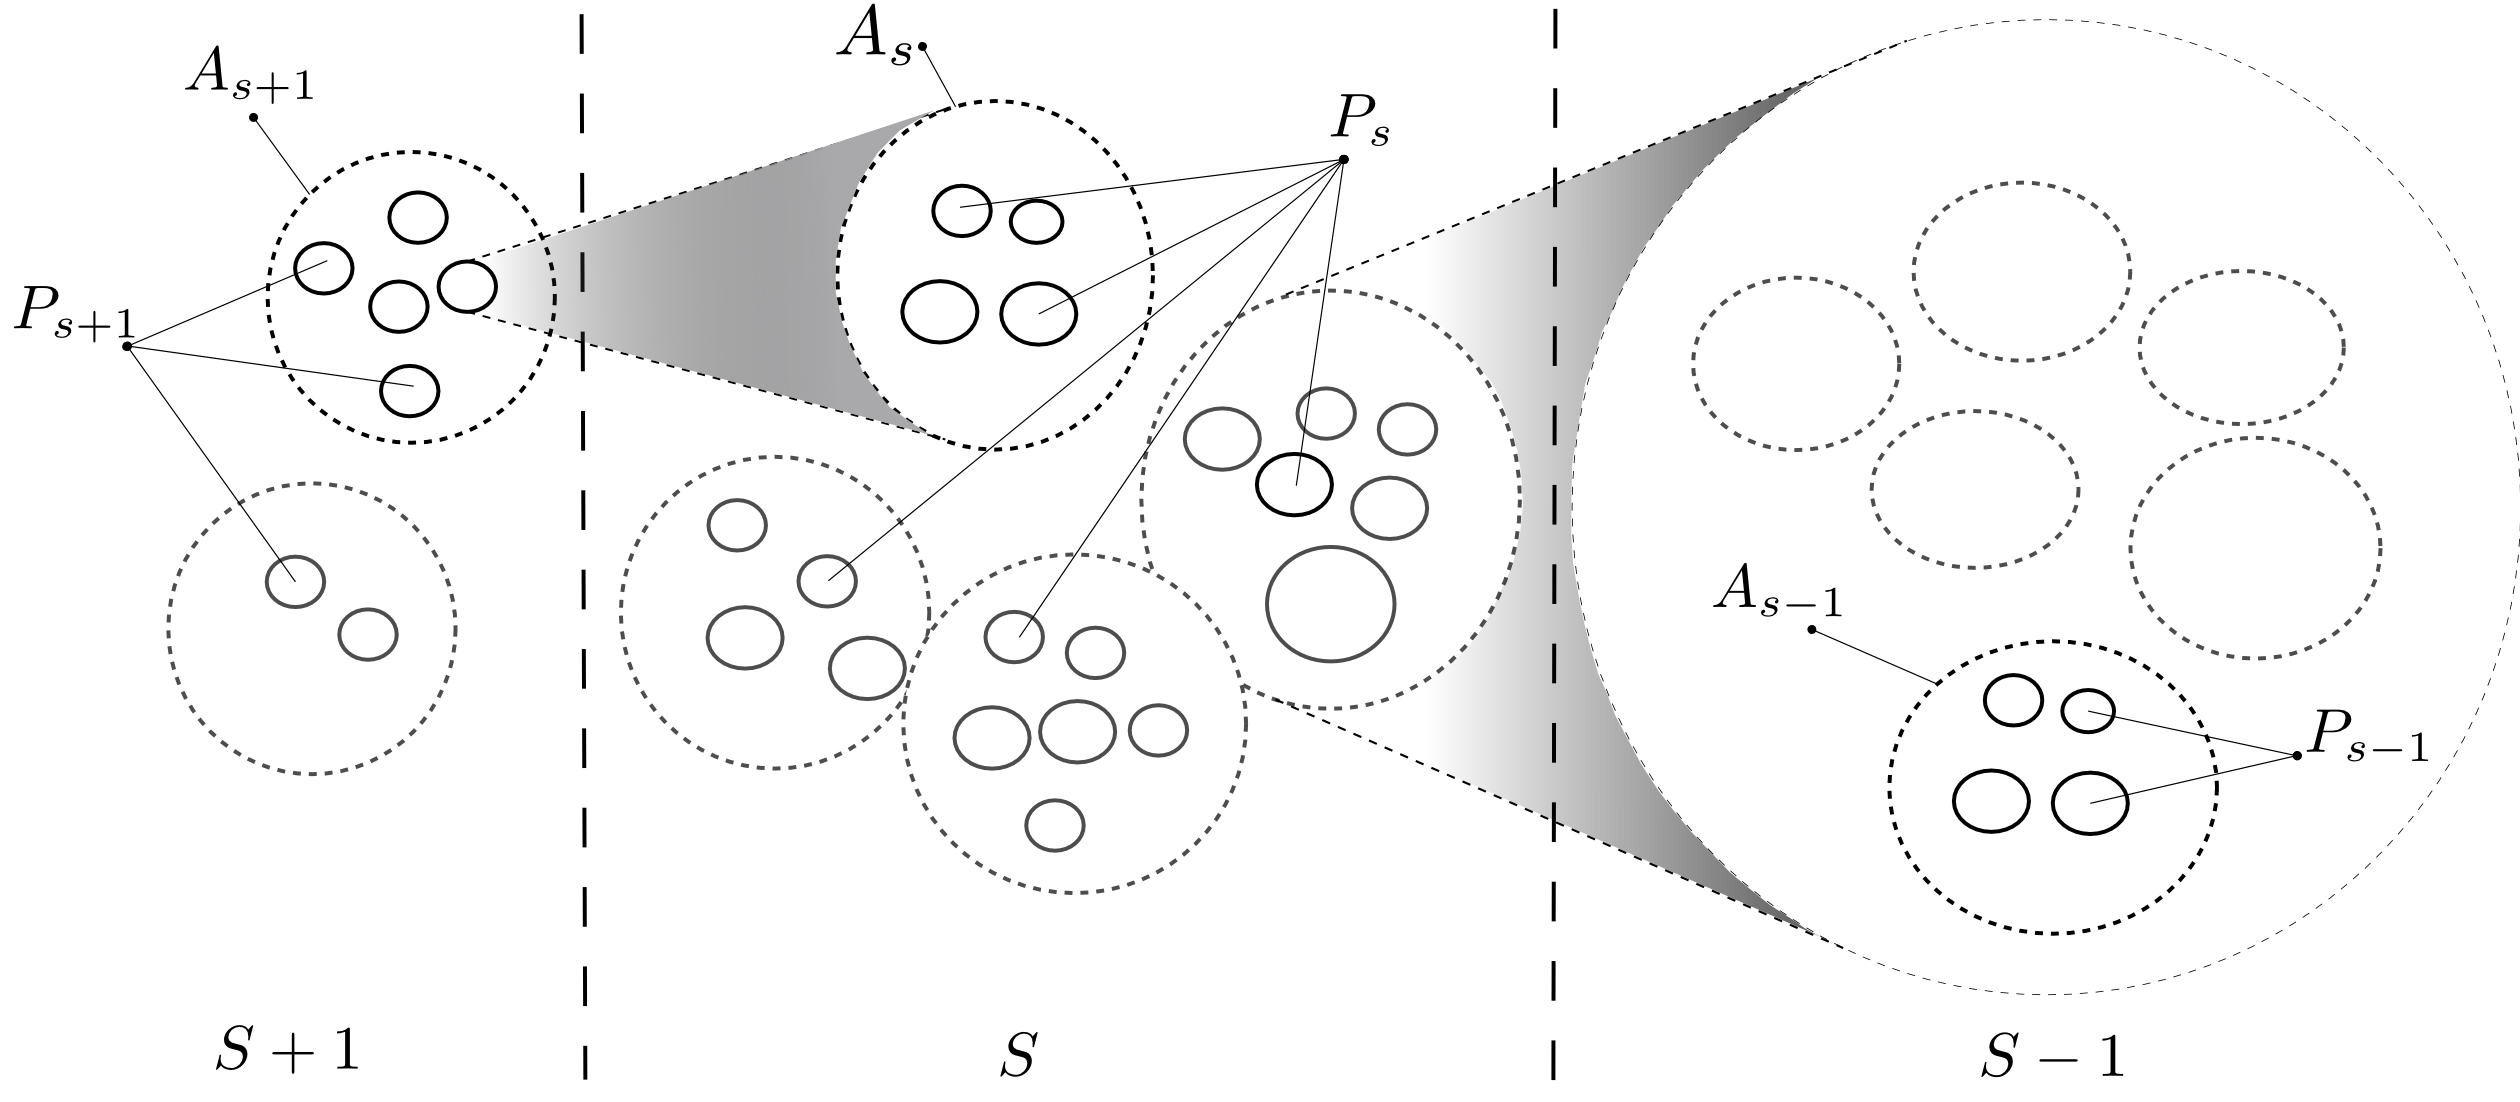 Conceptual model of individuation of cognition in terms of relationship among scales, populations and boundaries. The chosen scale of analysis is $S$. $S+1$ is the higher scale while $S-1$ is the lower scale. $P_{s}$ denotes a population of agents at scale $S$. Solid circles denote the agents of population $P$ at any scale. Dashed lined circles denote super-agents at any scale: e.g. -- $A_{s}$ at the center of the figure, denotes a super-agent that emerges from the interactions of agents in $P_{s}$. Super-agents at scale $S$ are the agents of the population $P_{s+1}$. The $i-th$ super-agent at scale $S$ is denoted $A_{s}^{i}$, the superscript is omitted if unneeded. Also, the subscript $S$ is omitted from $A$ or $P$ in the text if it is redundant (adapted from [@weinbaum_weaver_synthetic_2017]).